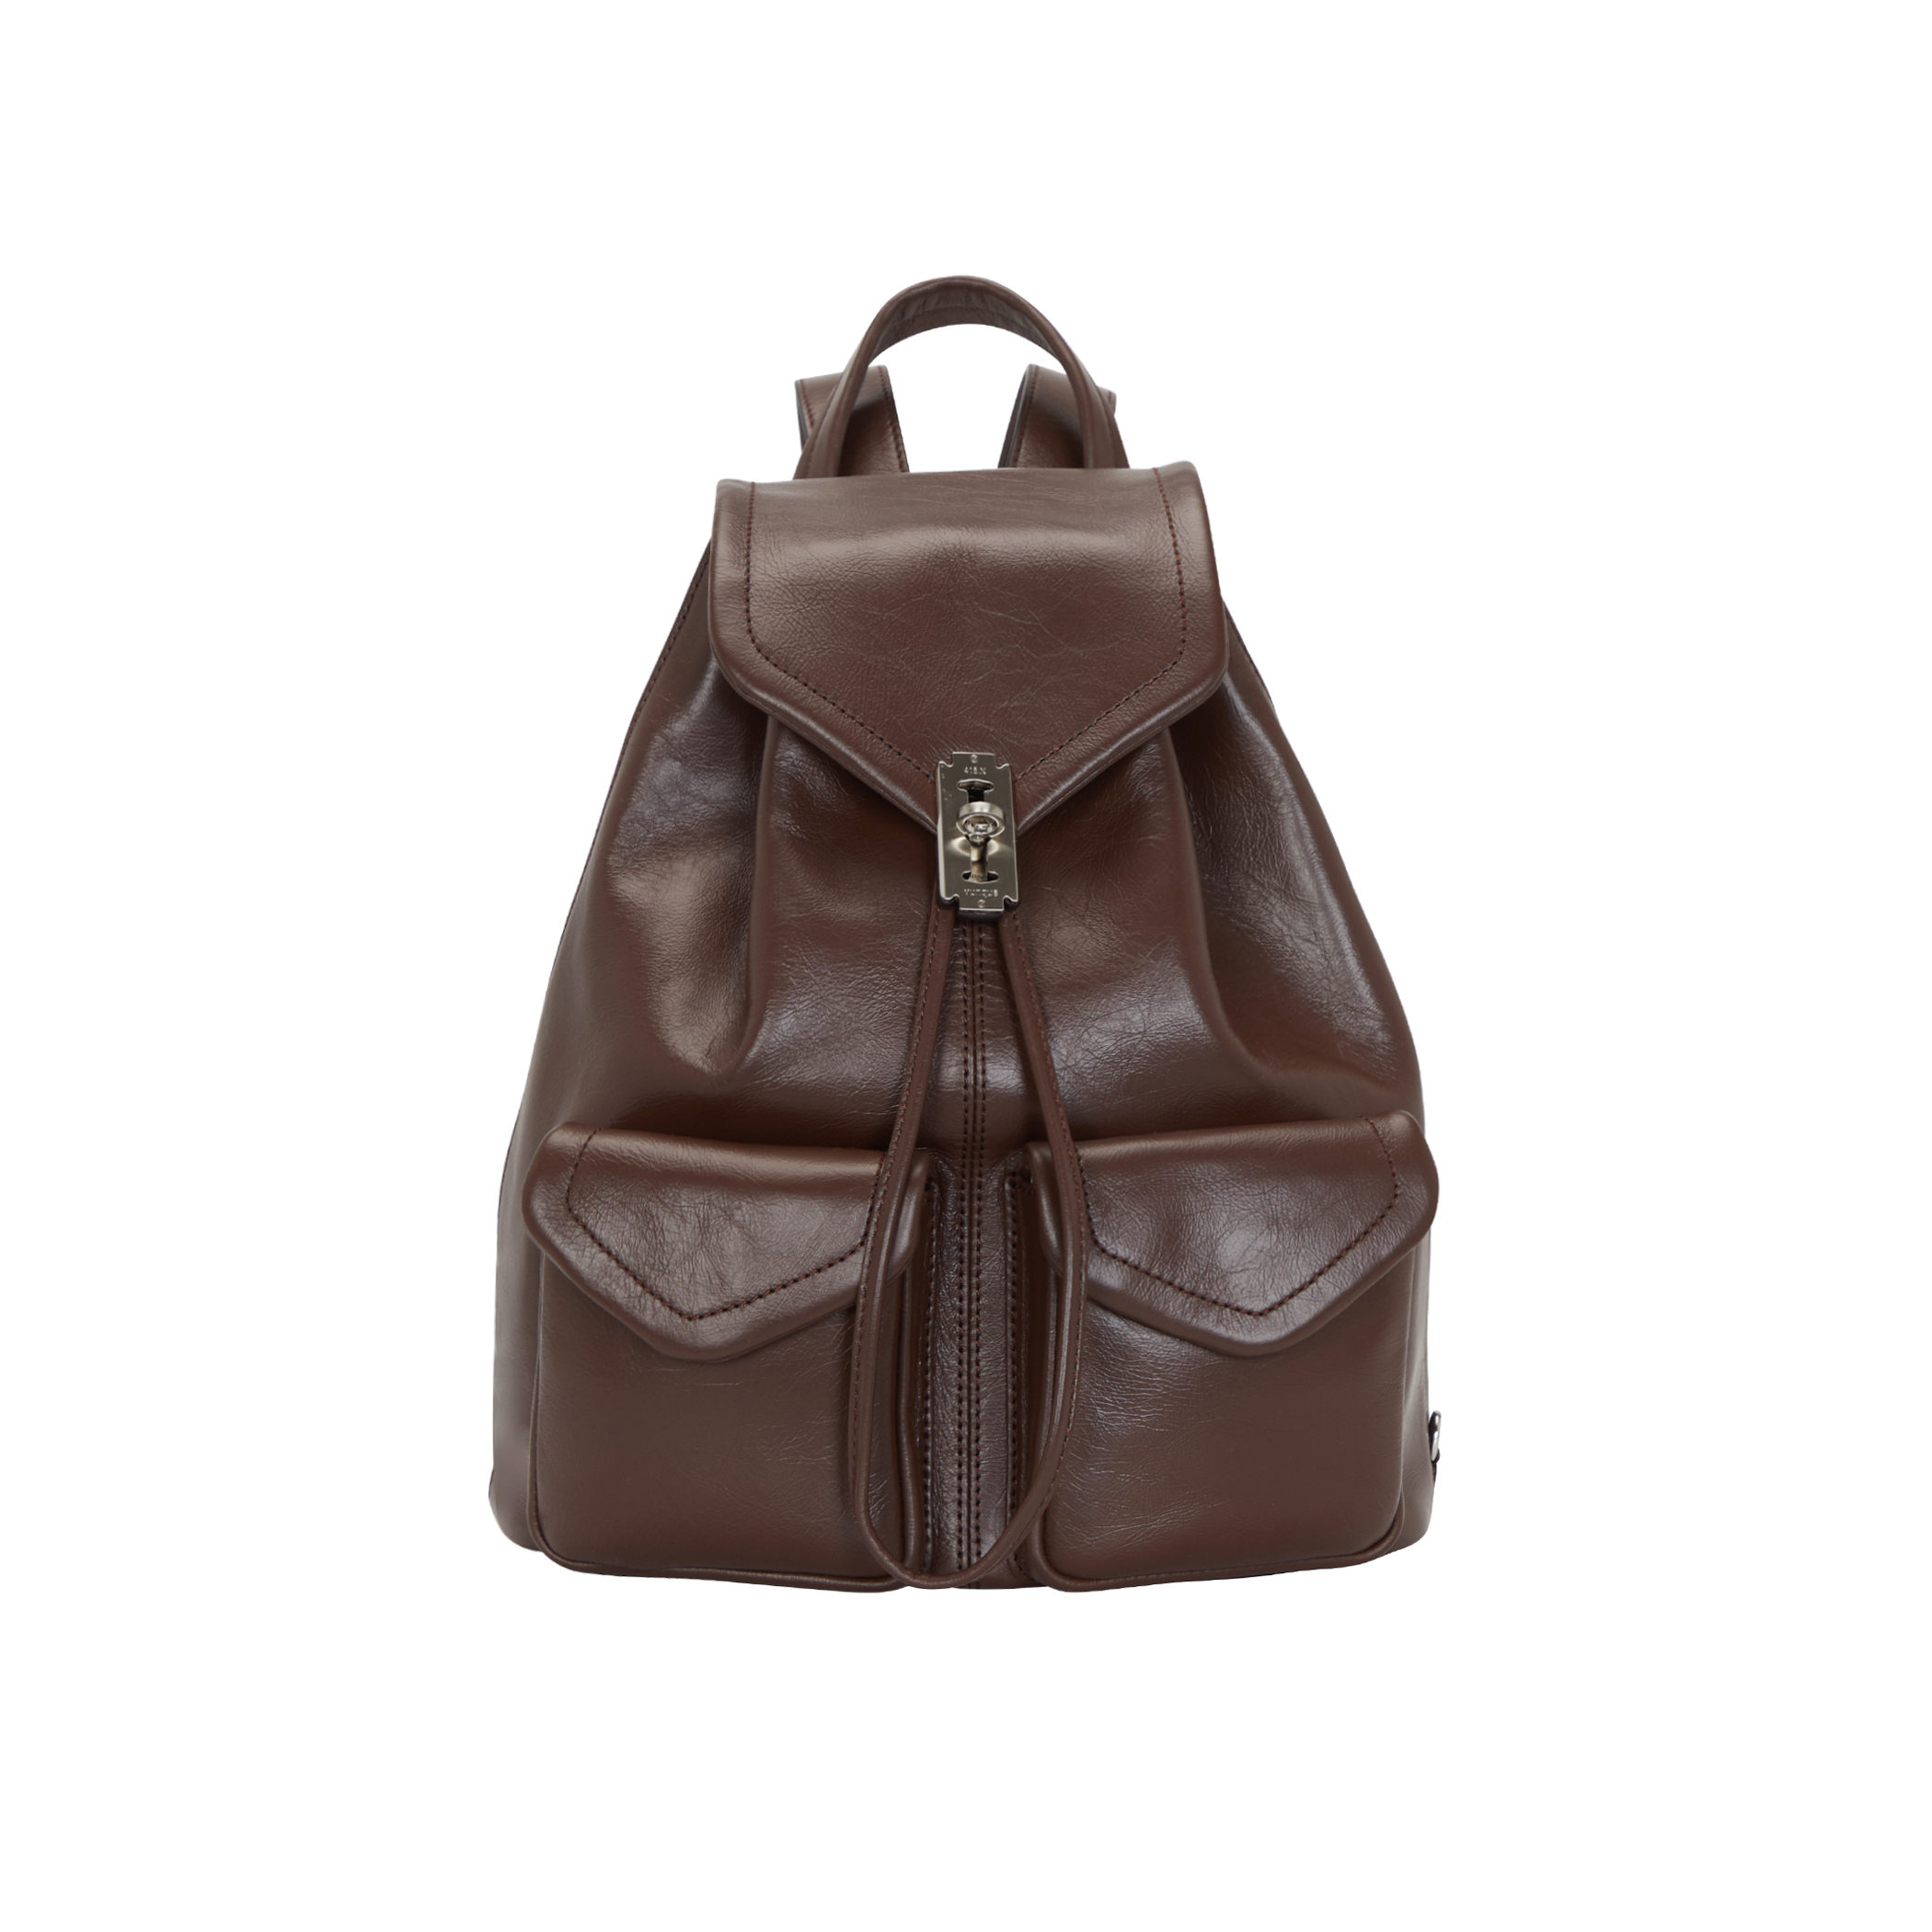 Occam Doux double pocket Backpack M (오캄 두 더블 포켓 백팩 미듐) Choco Brown